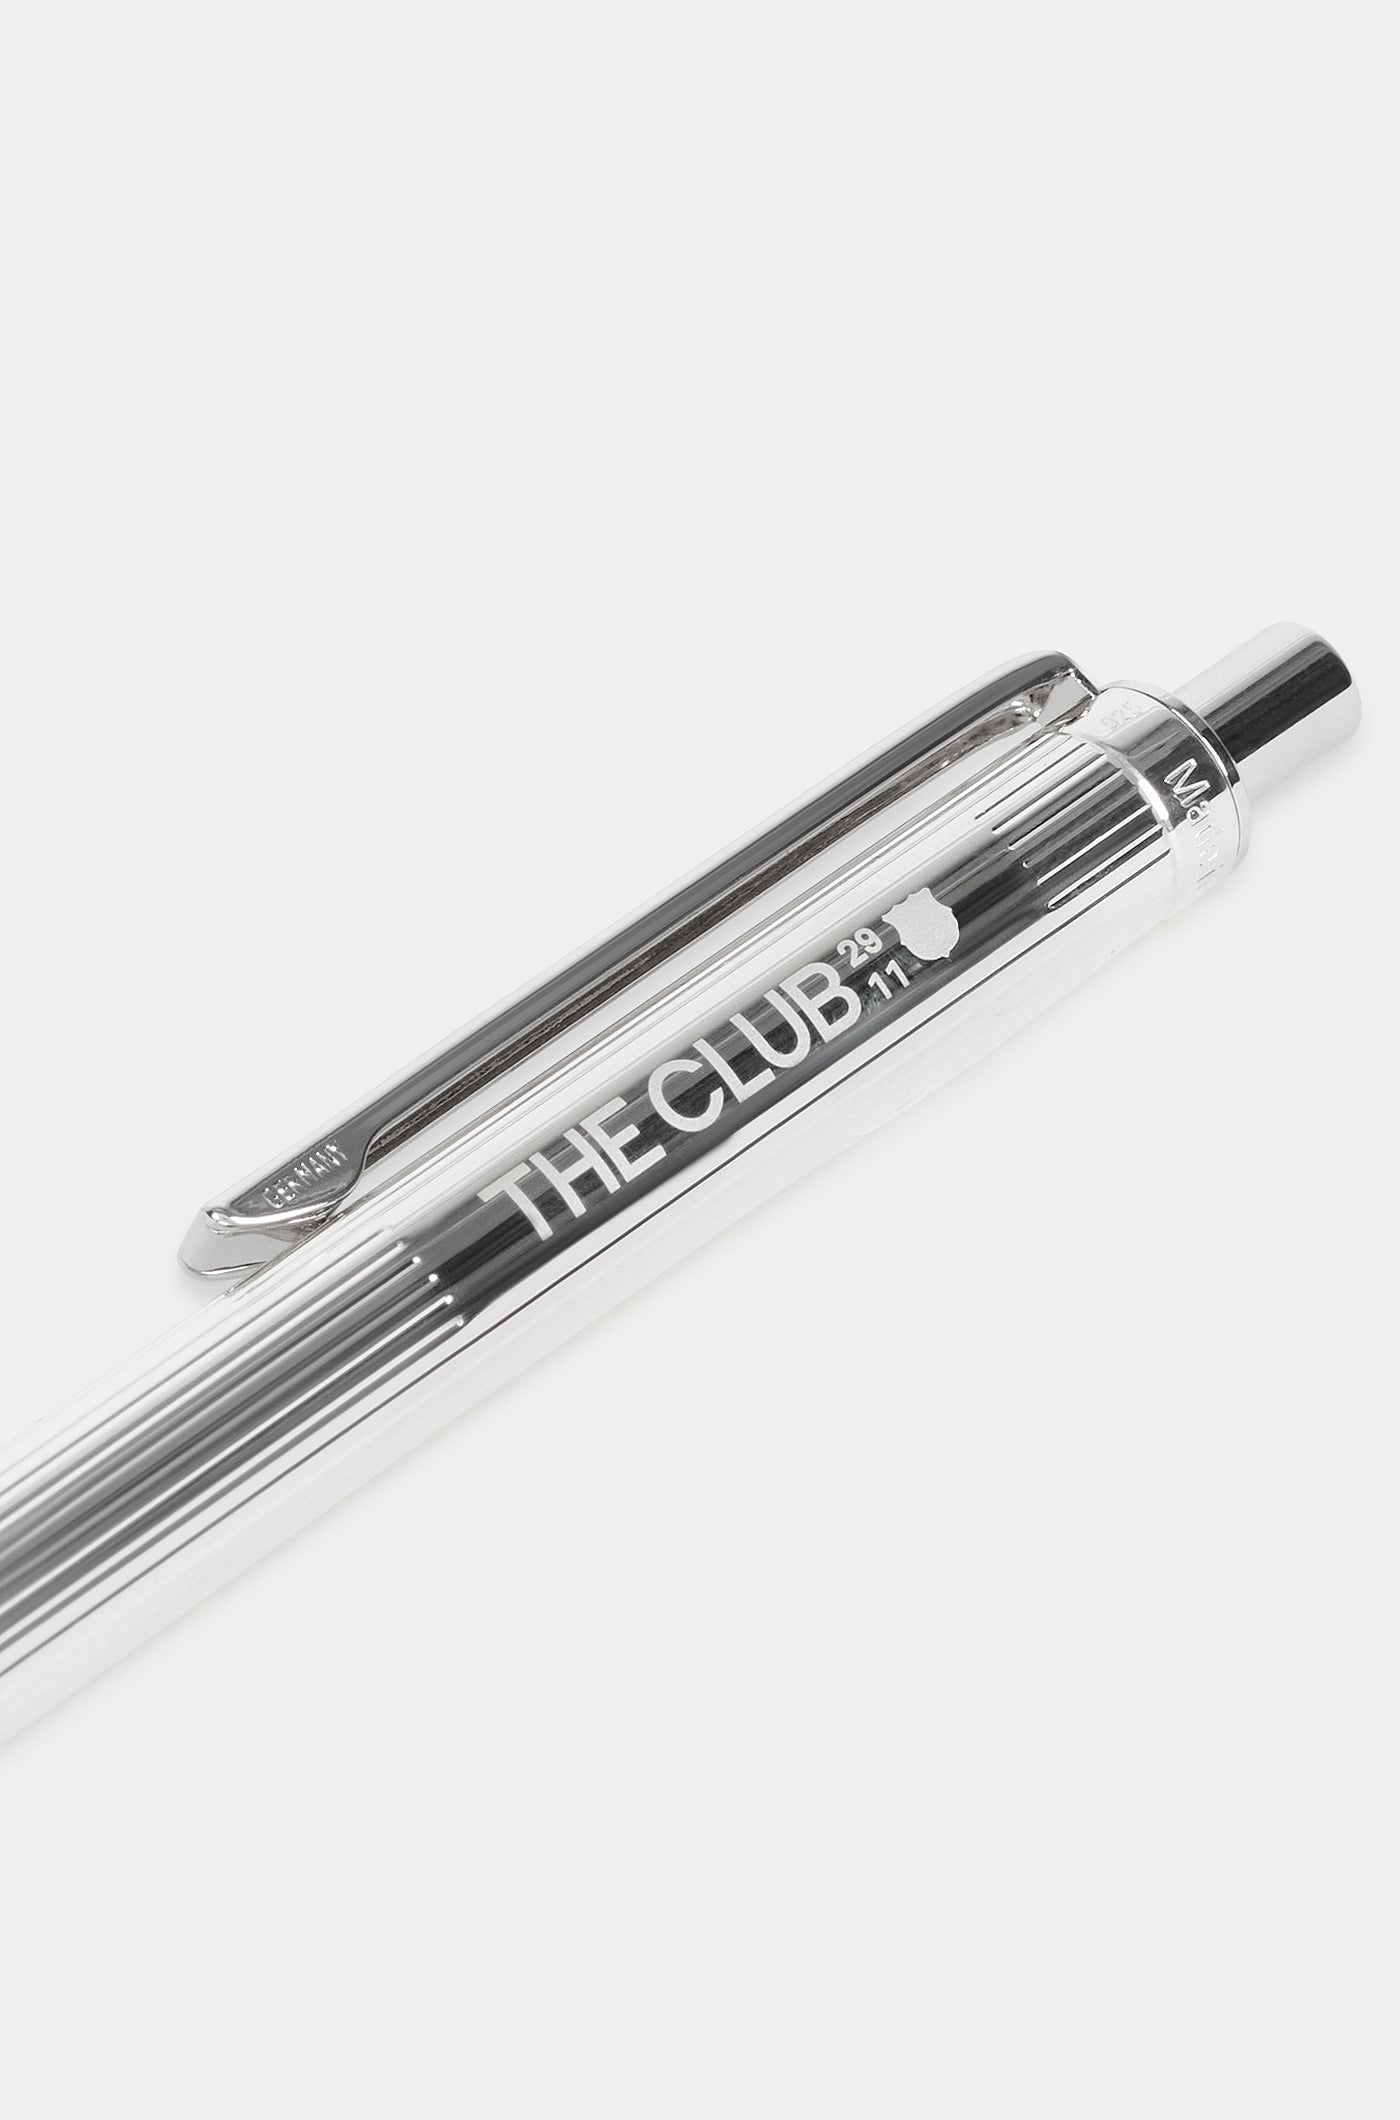 The Club sterling silver pen